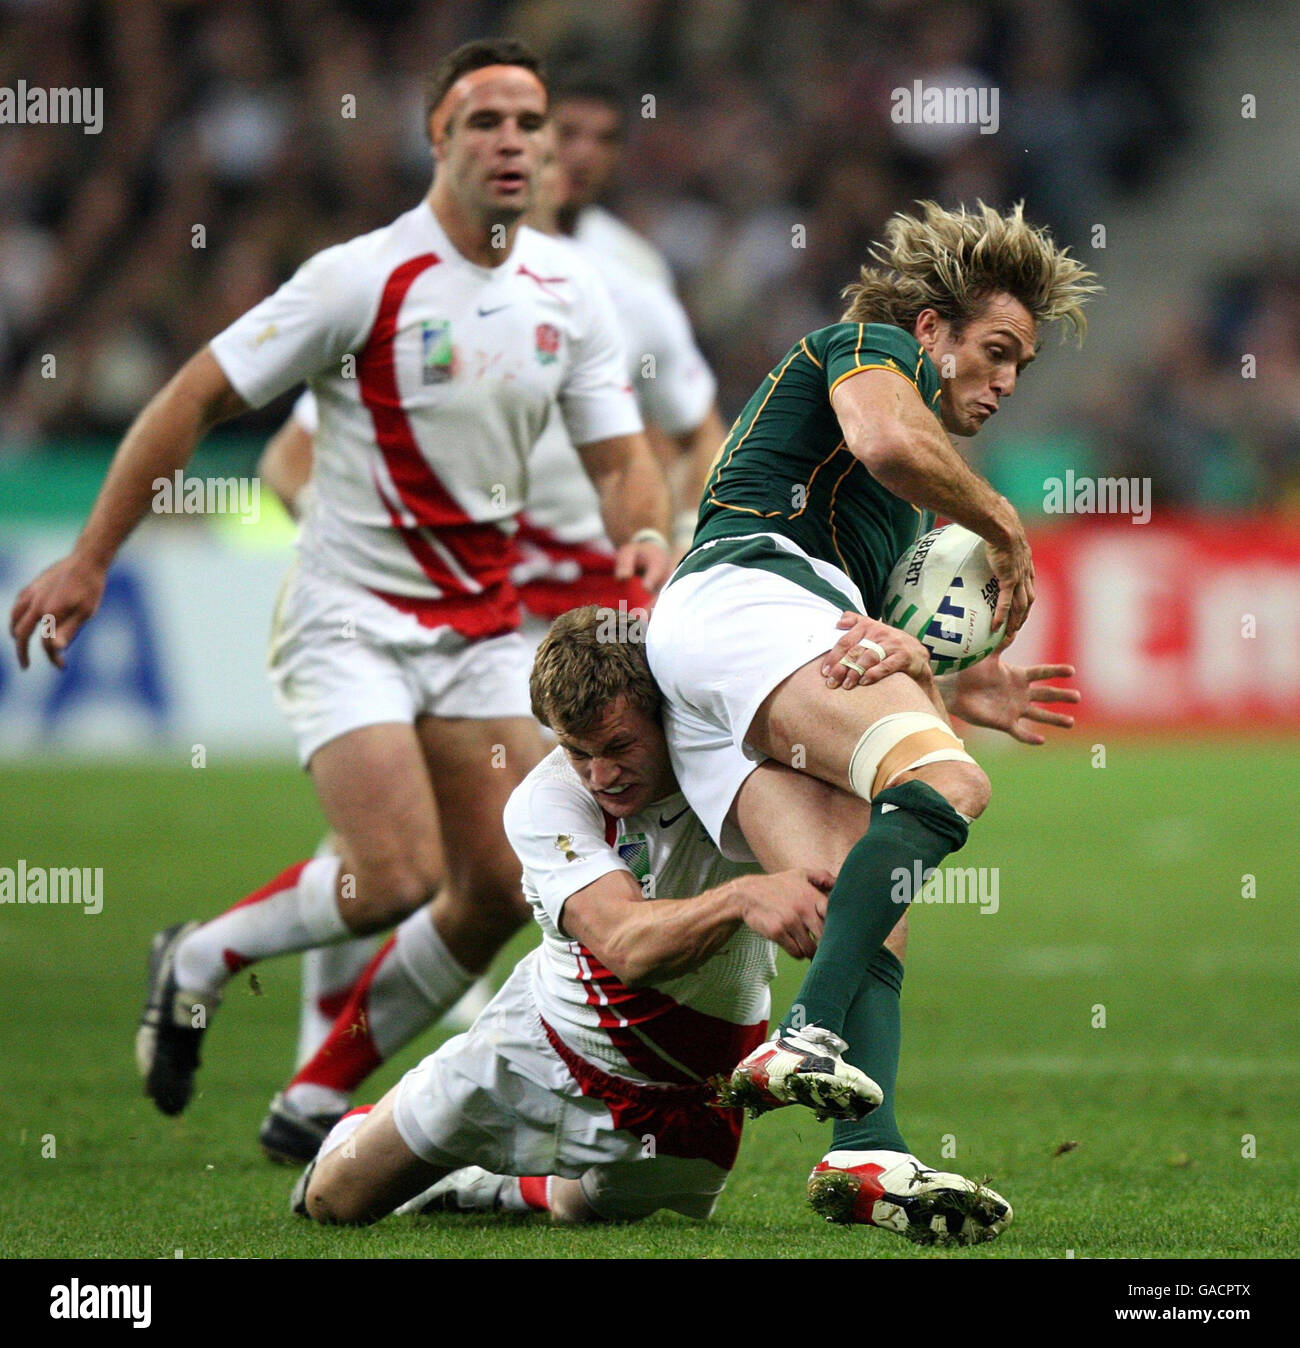 England's Mark Cueto tackles South Africa's Percy Montgomery during the IRB Rugby World Cup Final match at Stade de France, Saint Denis, France. Stock Photo